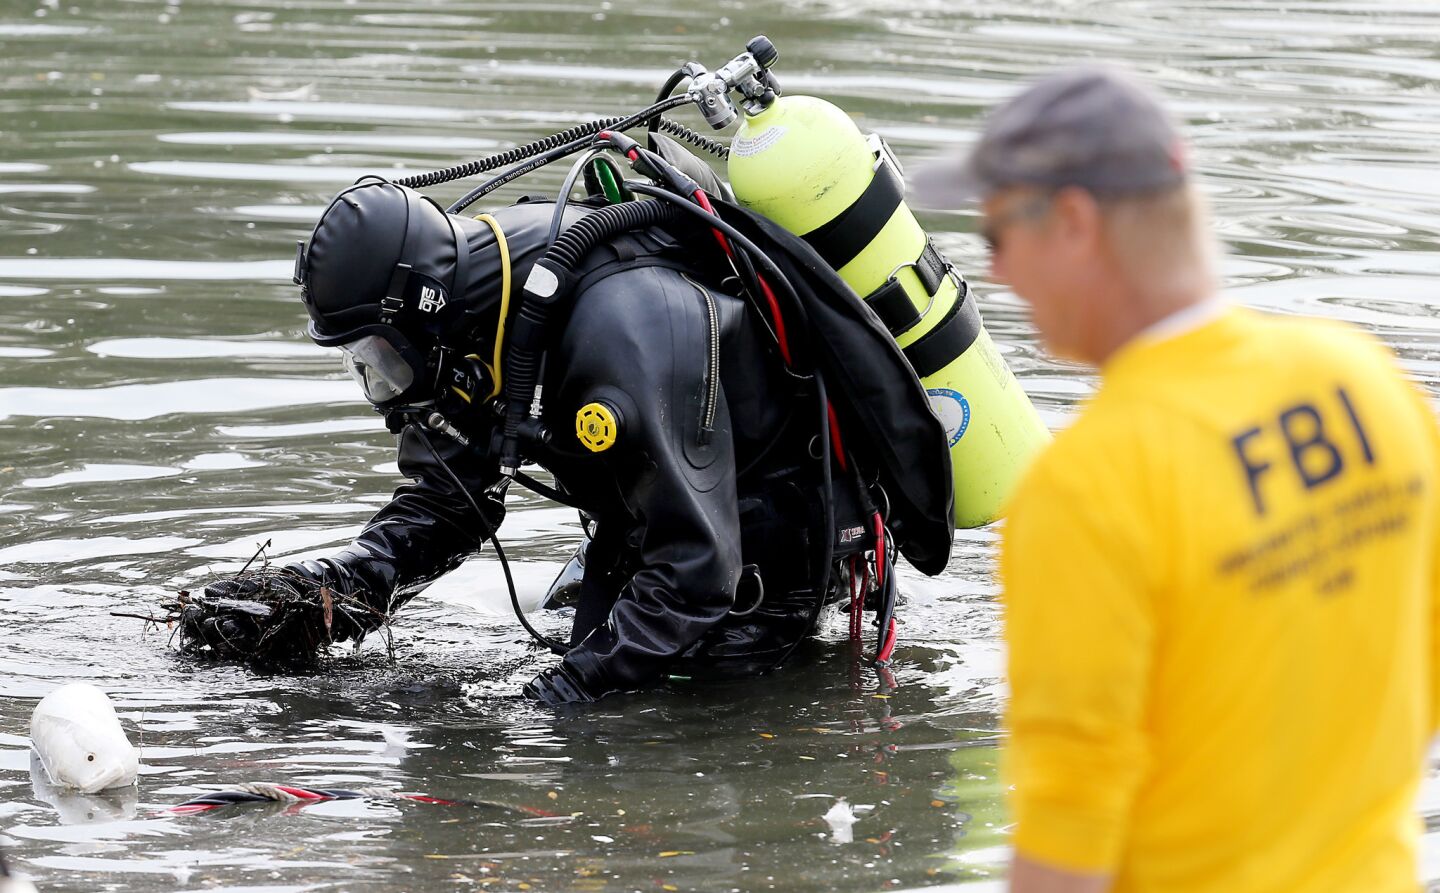 An FBI dive team searches a lake near the Inland Regional Center in connection with last week's terrorist attack.